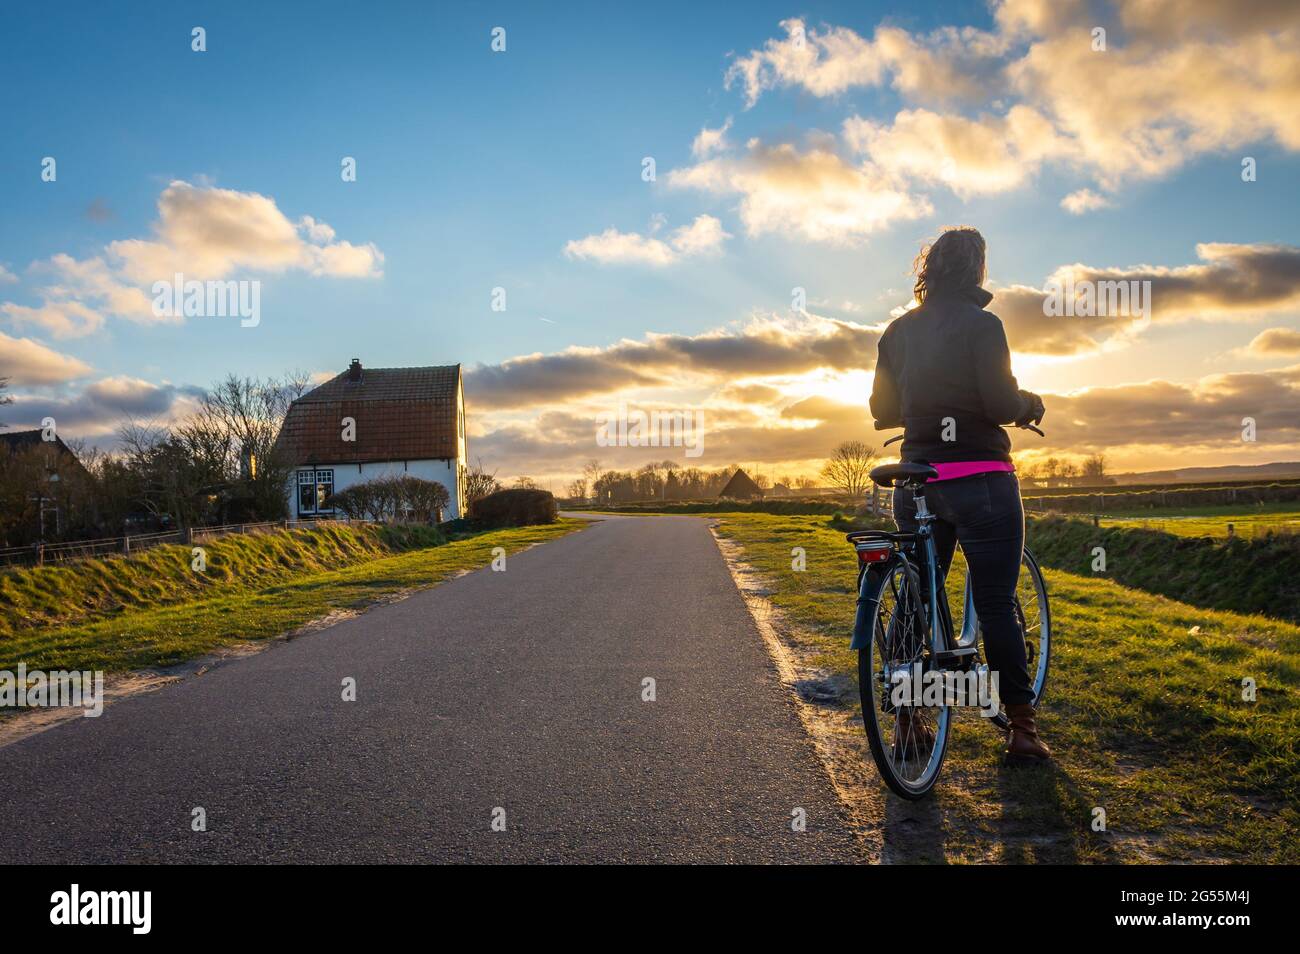 Cyclist in dutch countryside observing beautiful sunset sky Stock Photo